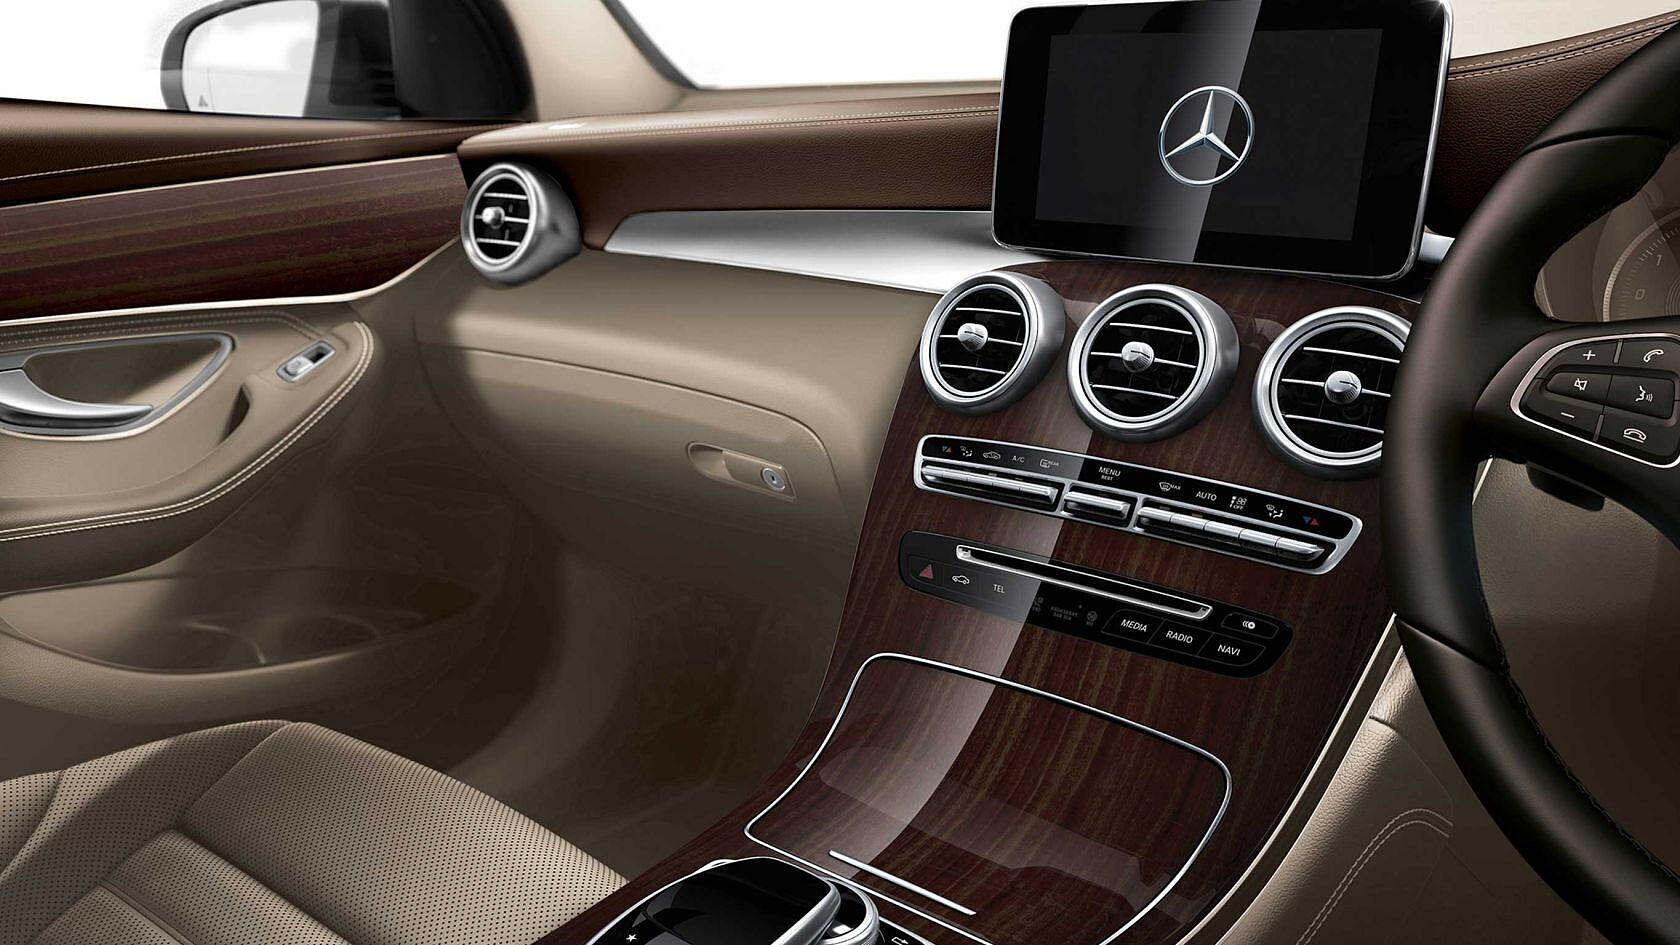 Glc Coupe 17 Mercedes Benz Glc Coupe 17 Interior Image Glc Coupe 17 Photos In India Carwale